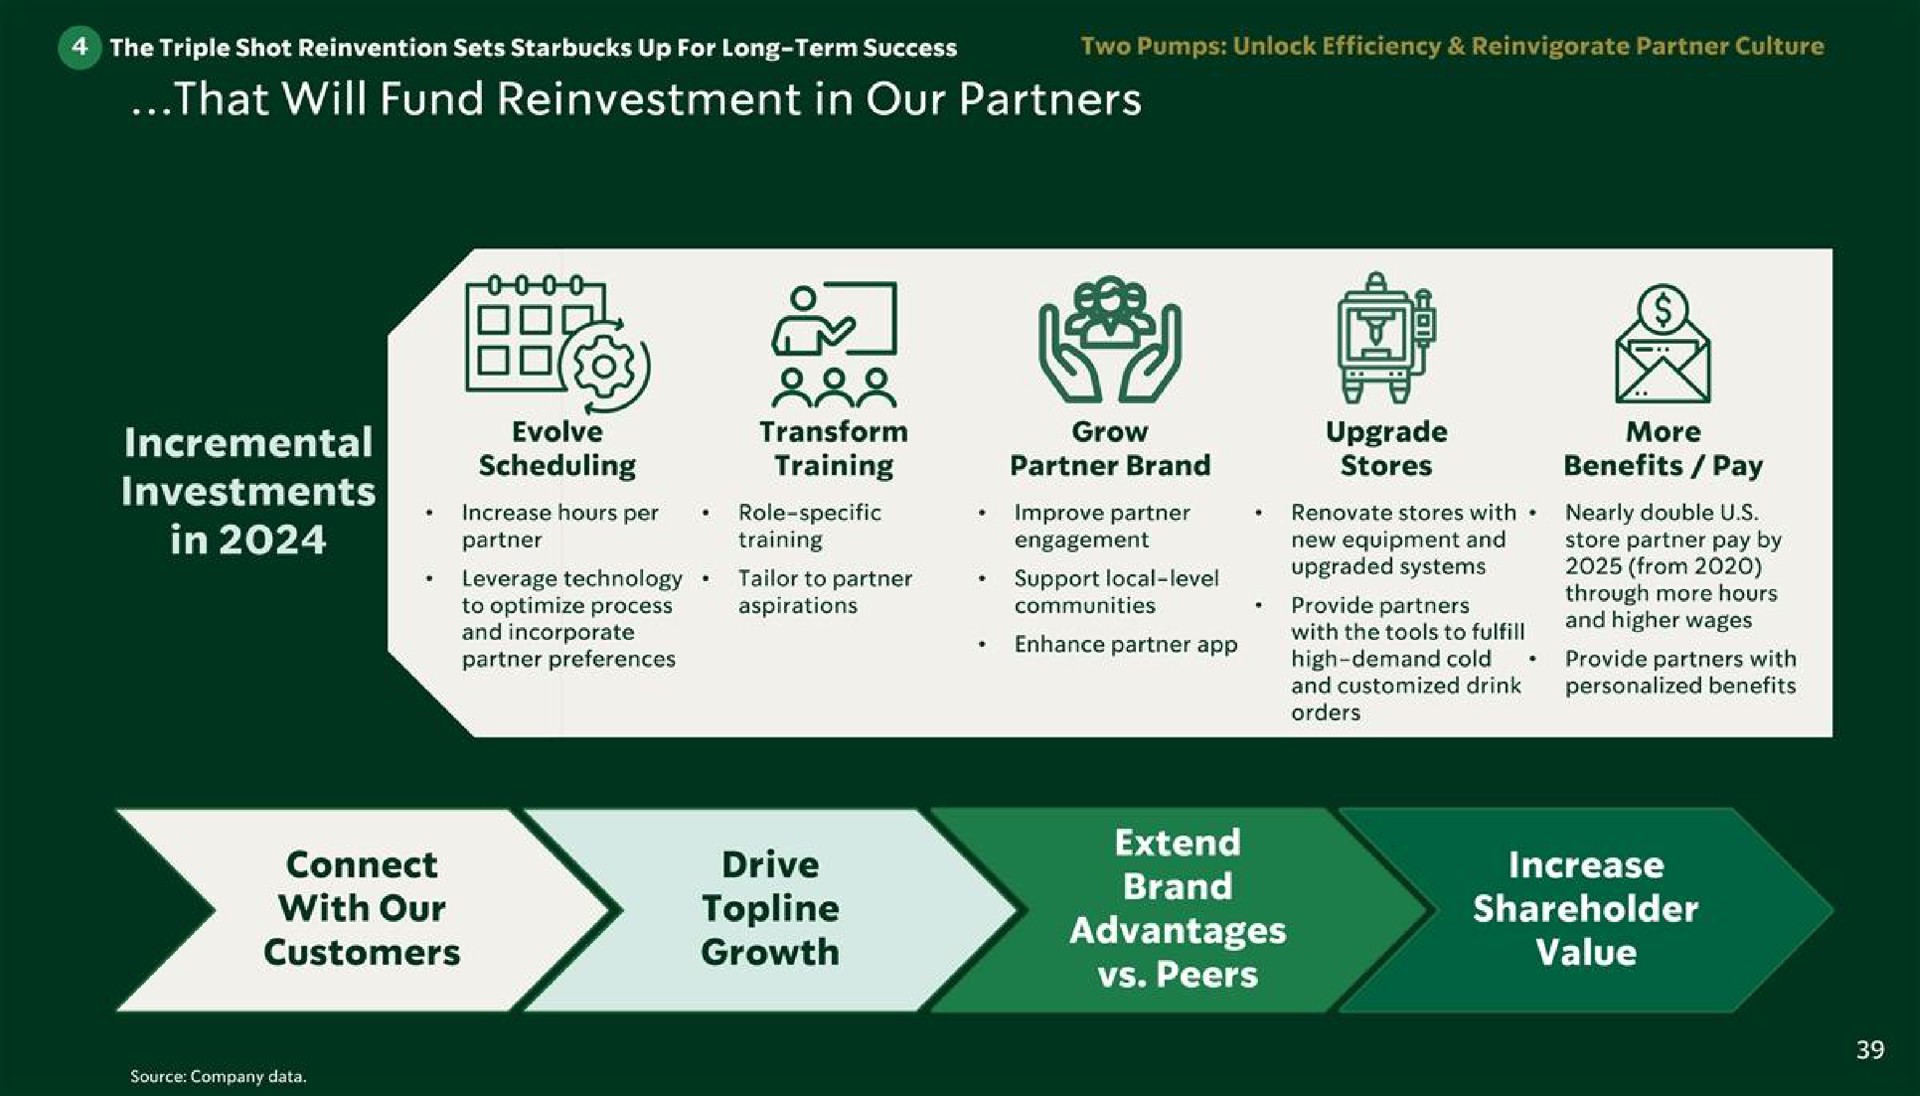 hat will fund reinvestment in our partners baa incremental topline extend advantages | Starbucks